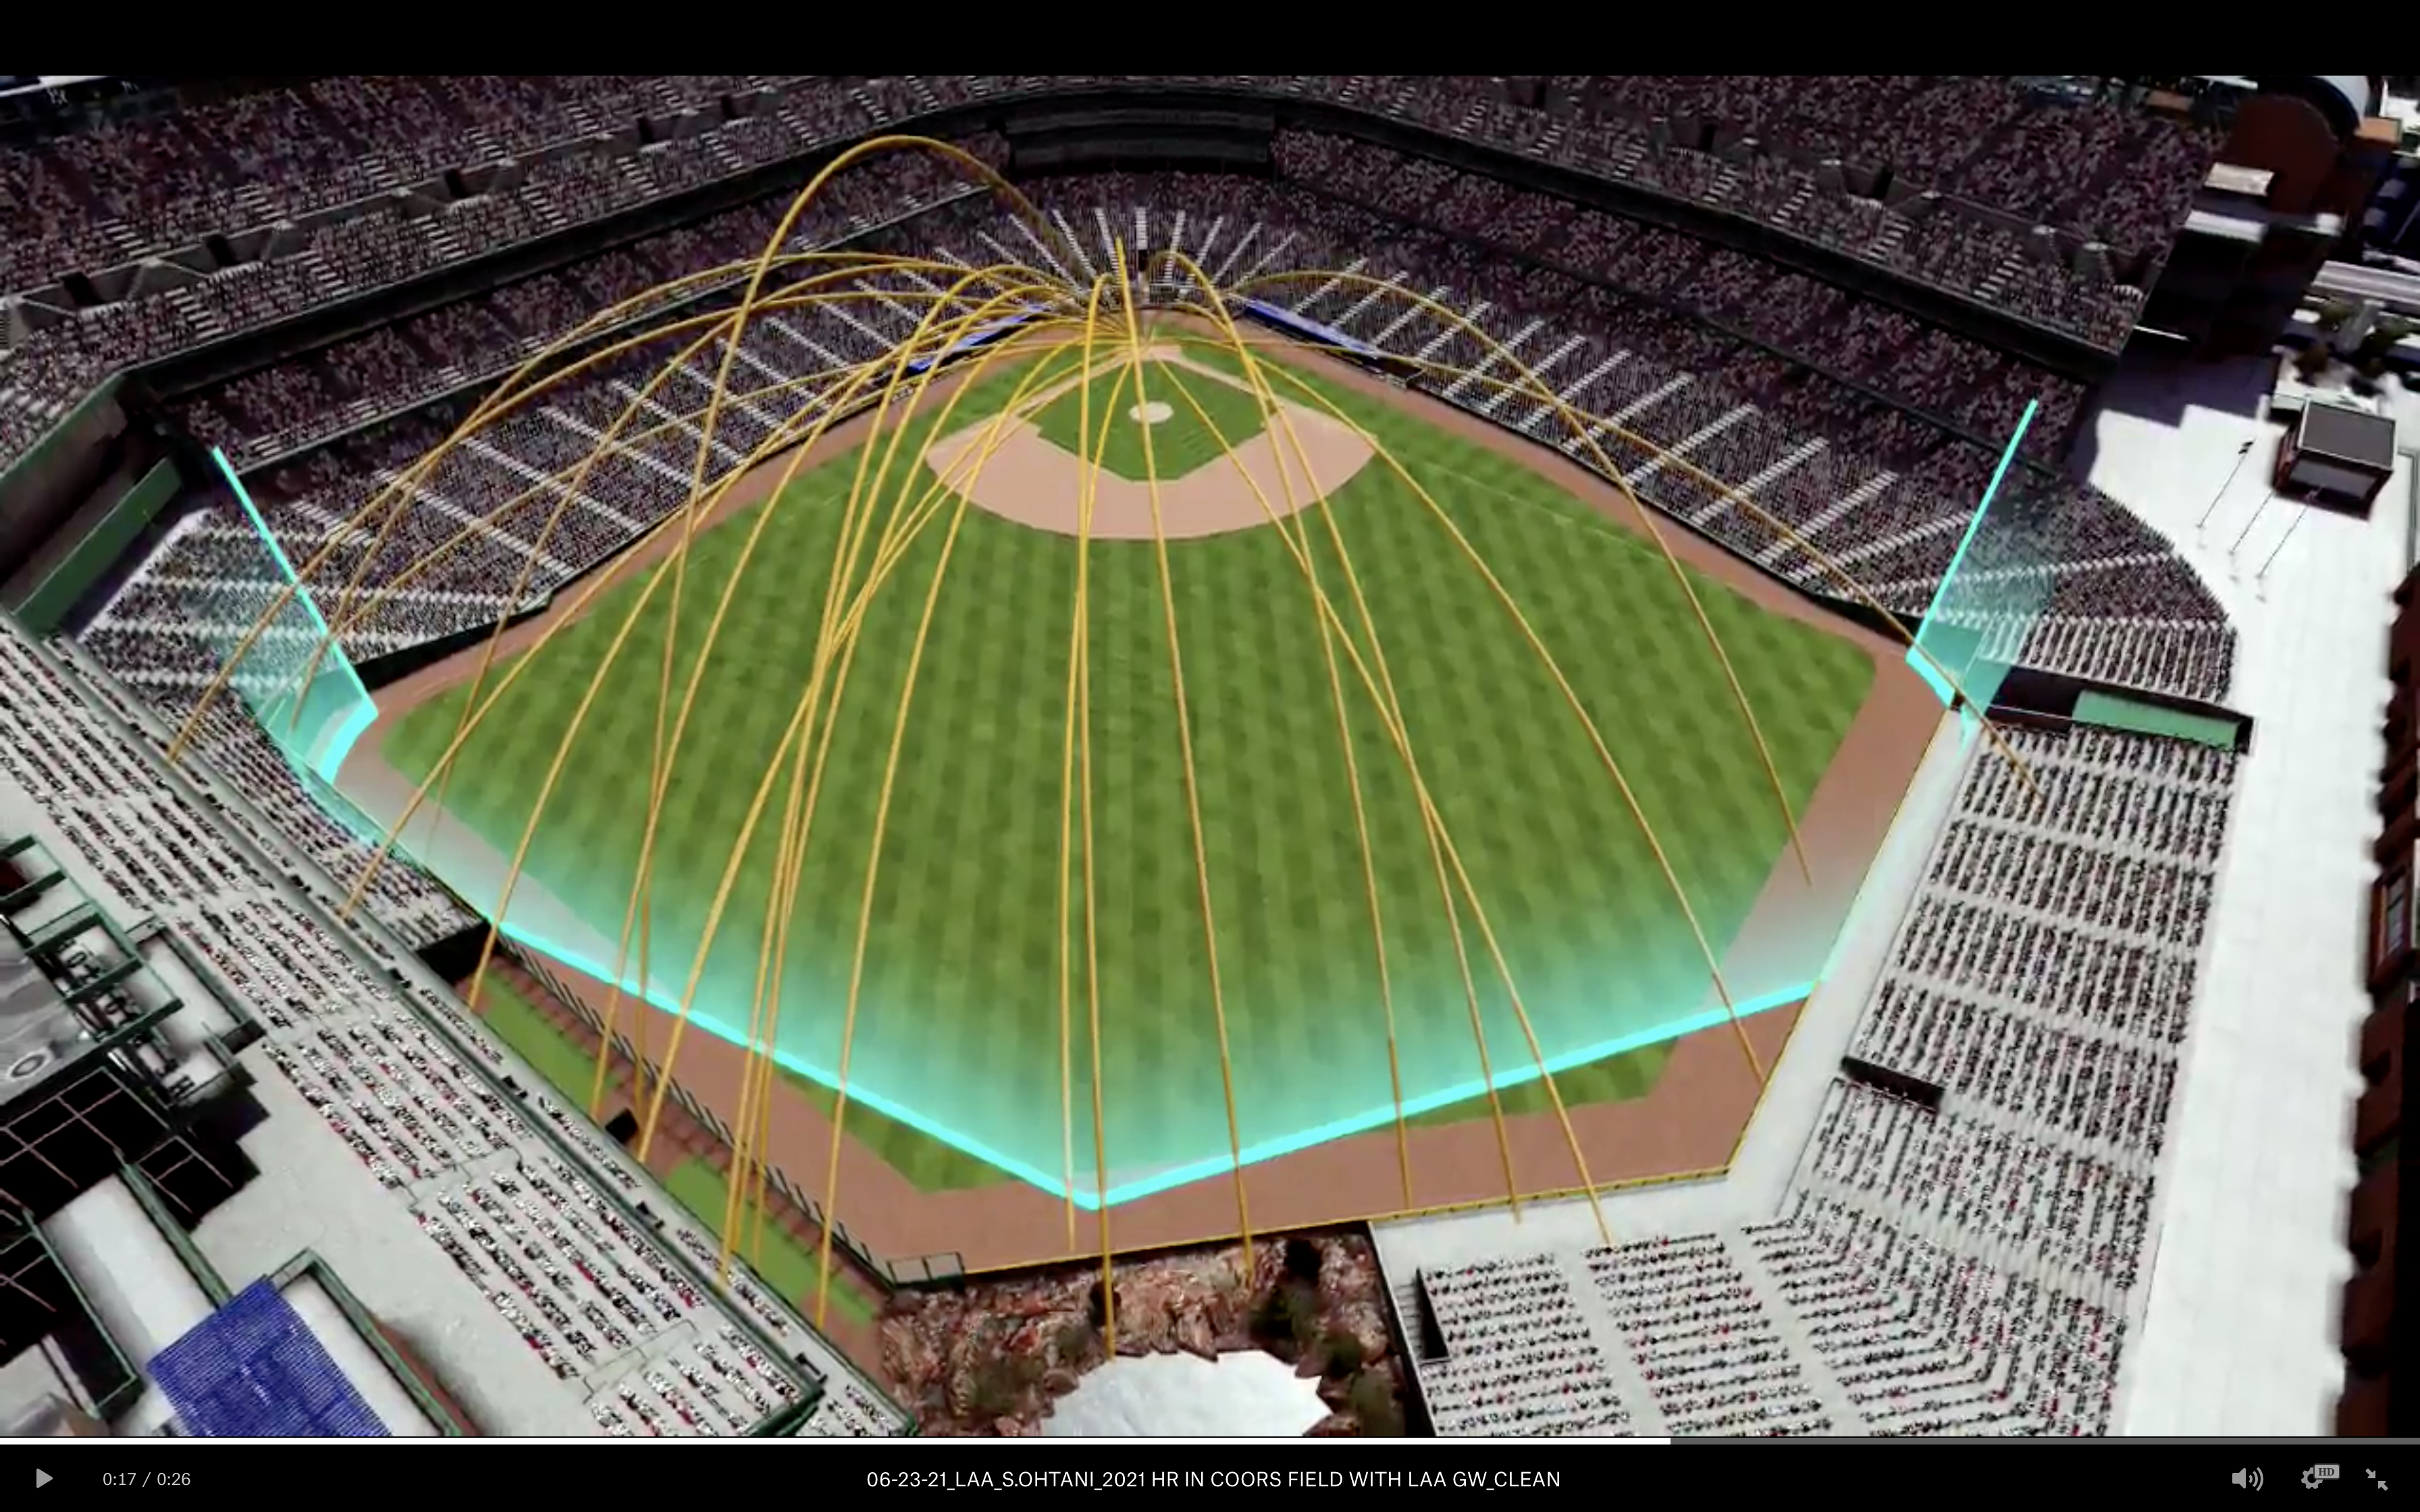 Live From MLB All-Star 2021 ESPN Enhances Statcast AR Graphics for Home Run Derby, Produces Draft From Coors Field